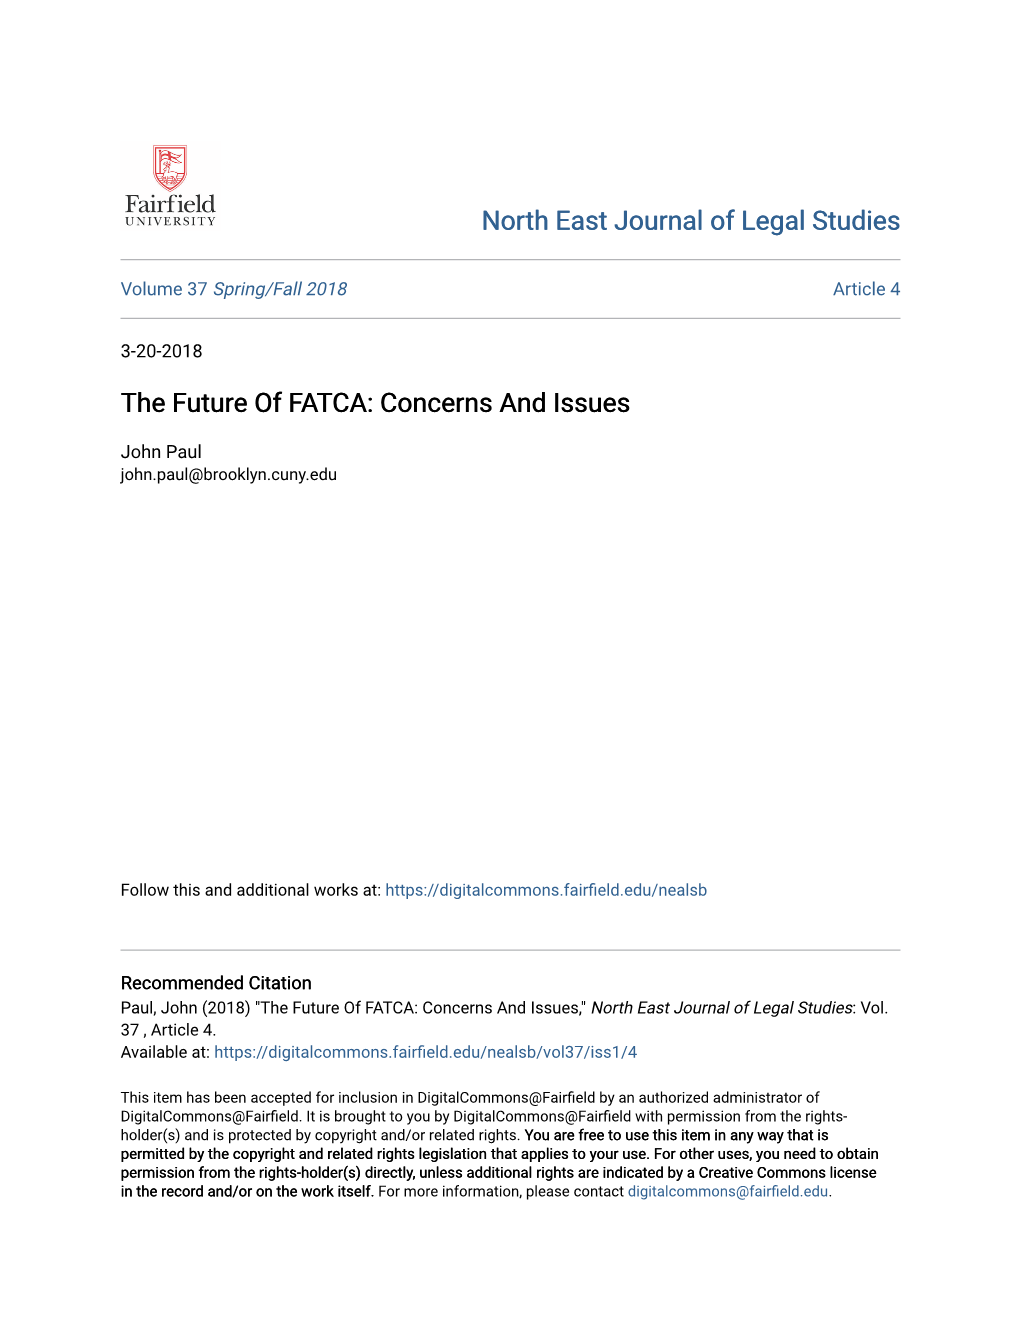 The Future of FATCA: Concerns and Issues